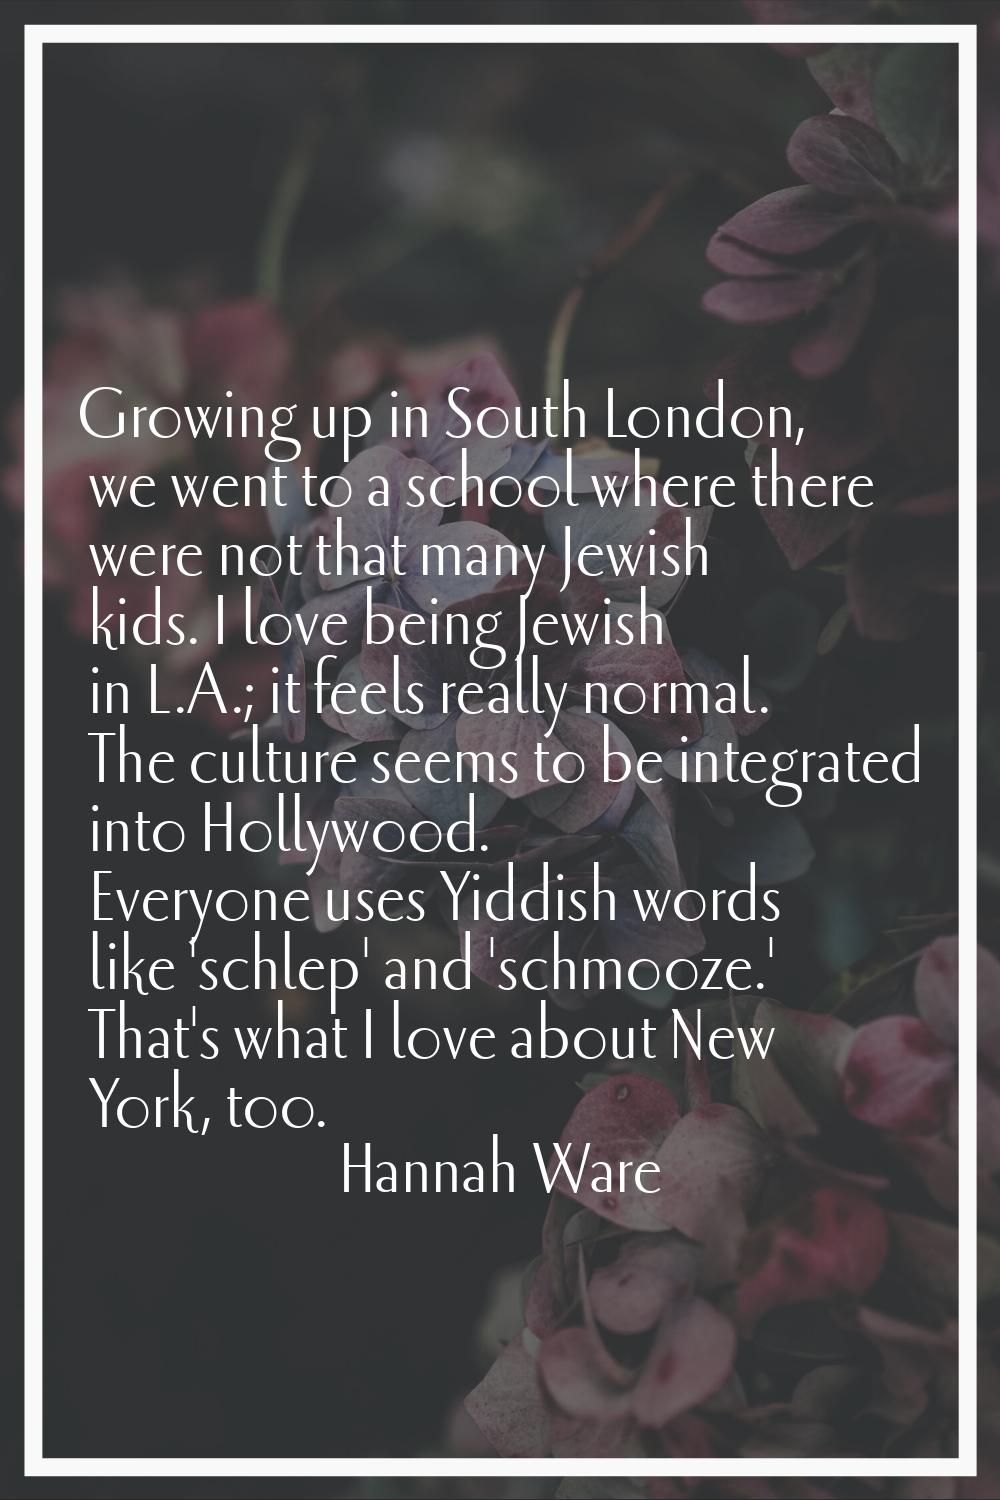 Growing up in South London, we went to a school where there were not that many Jewish kids. I love 